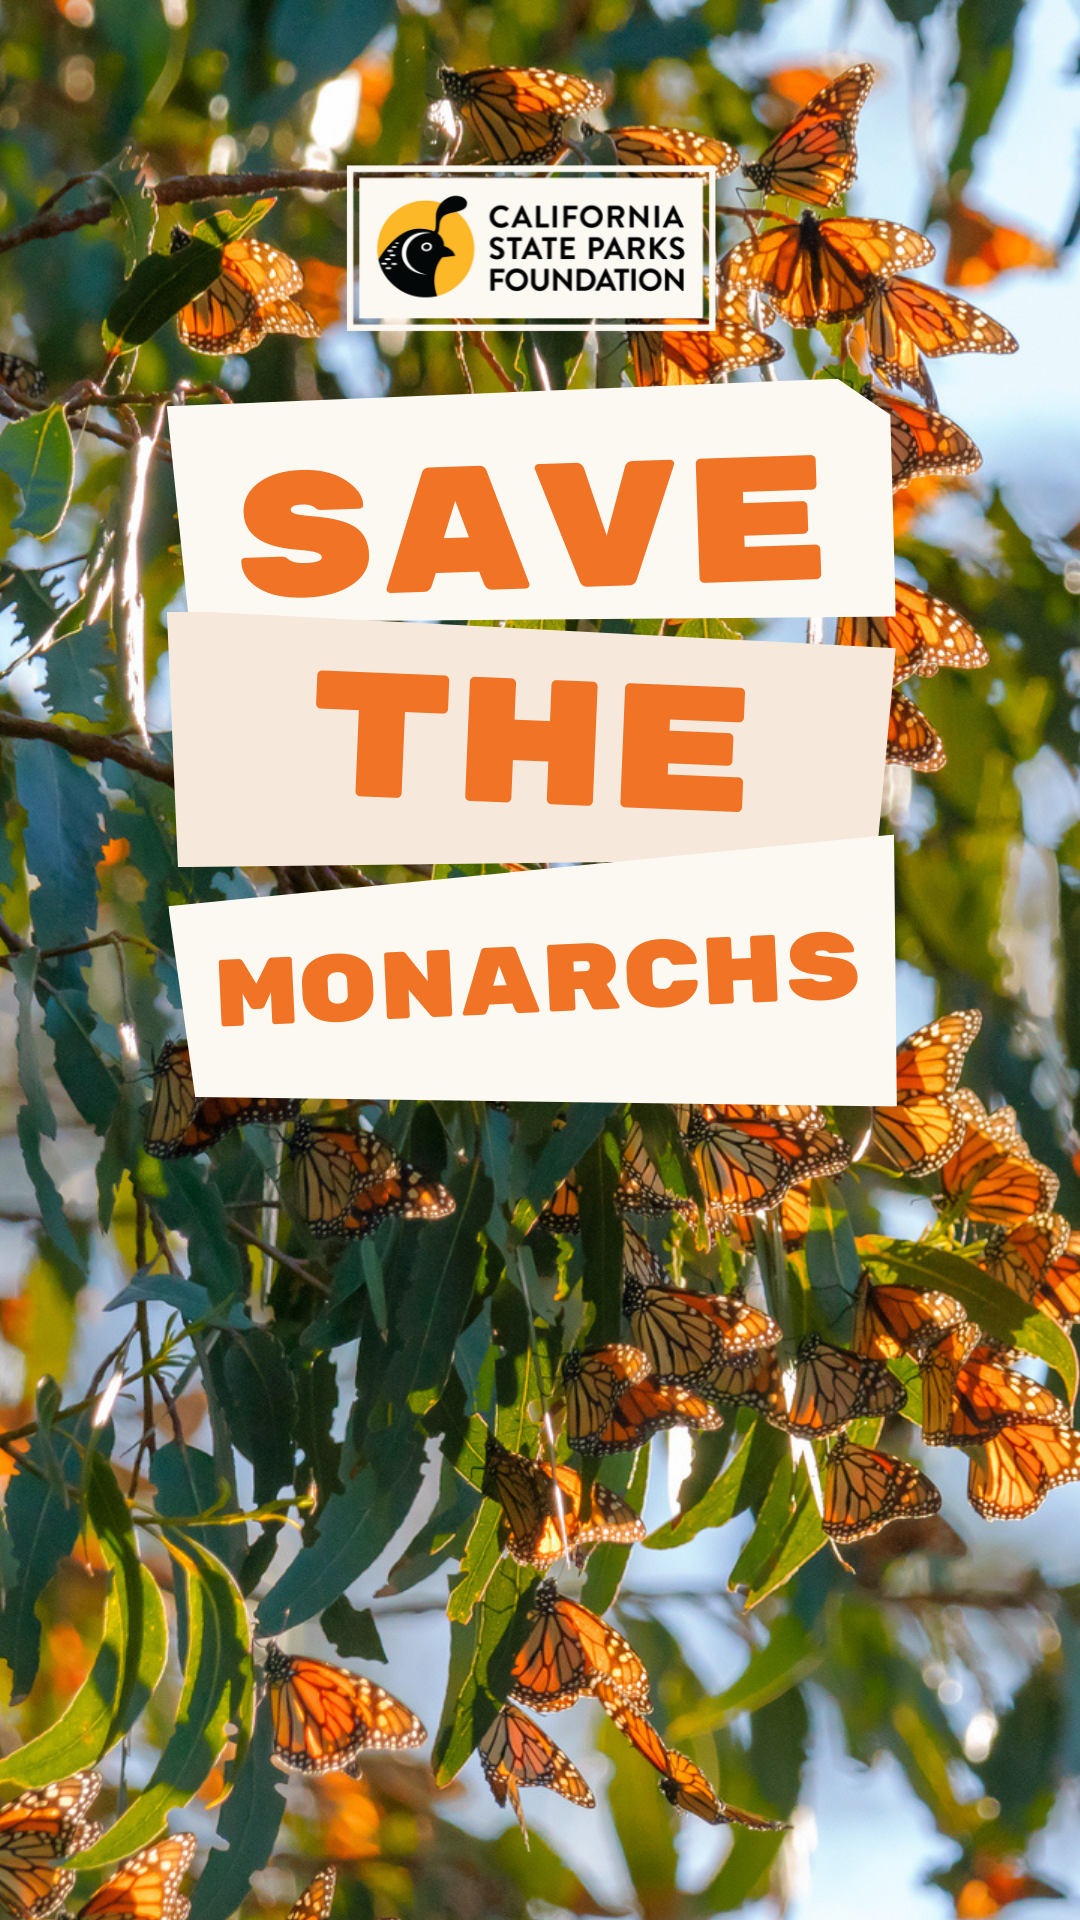 Protect the Monarchs